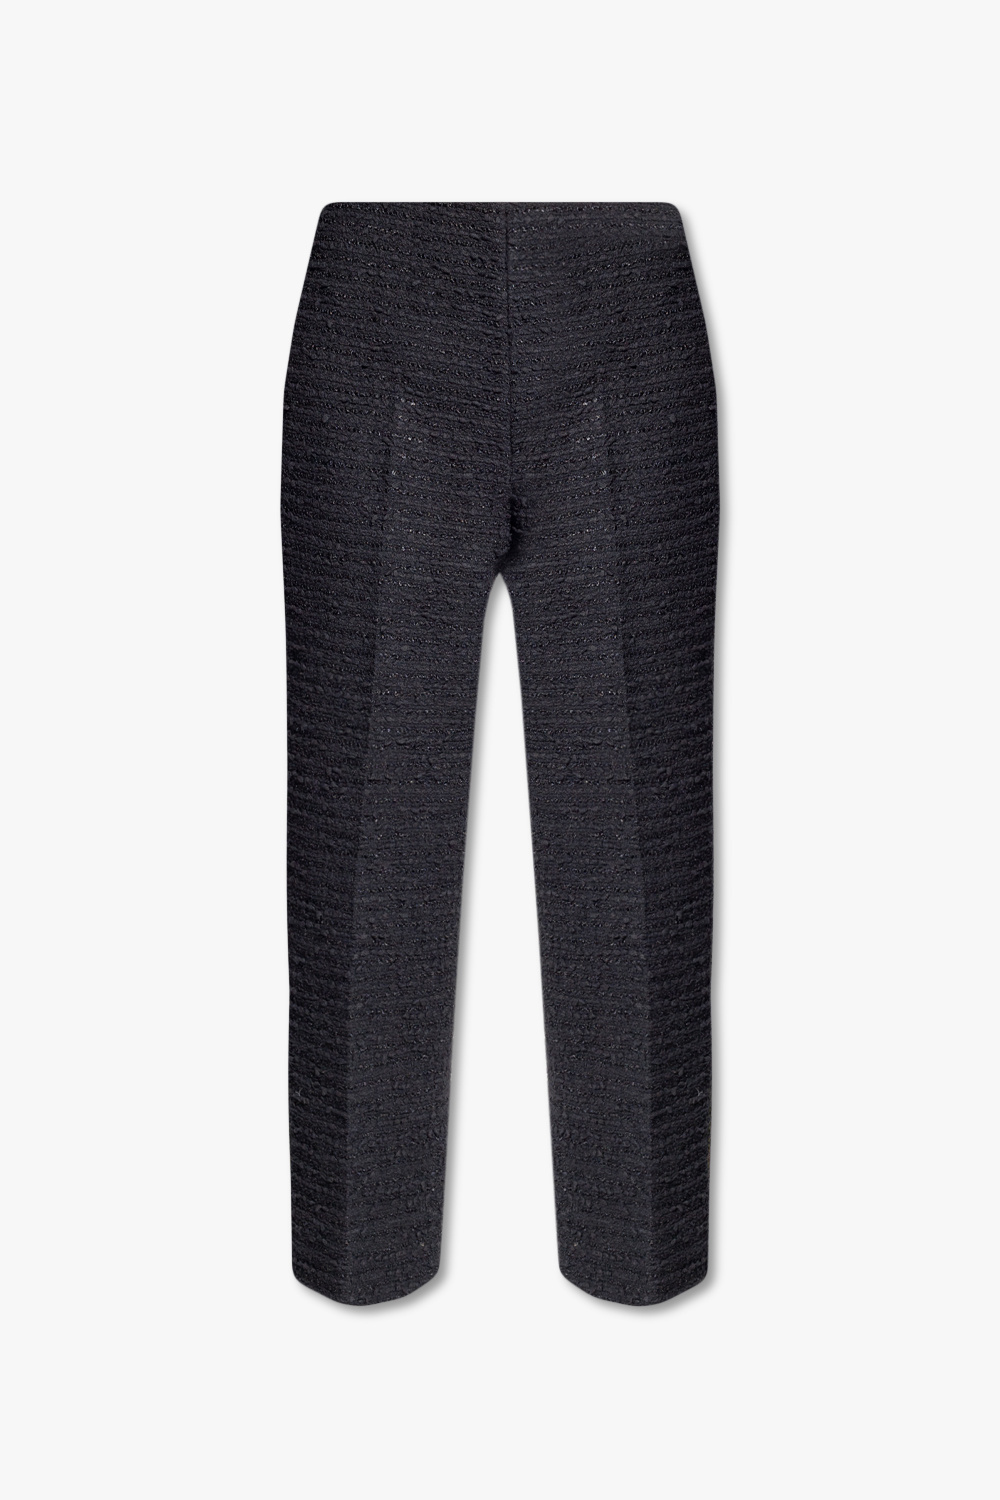 Gucci Tweed trousers